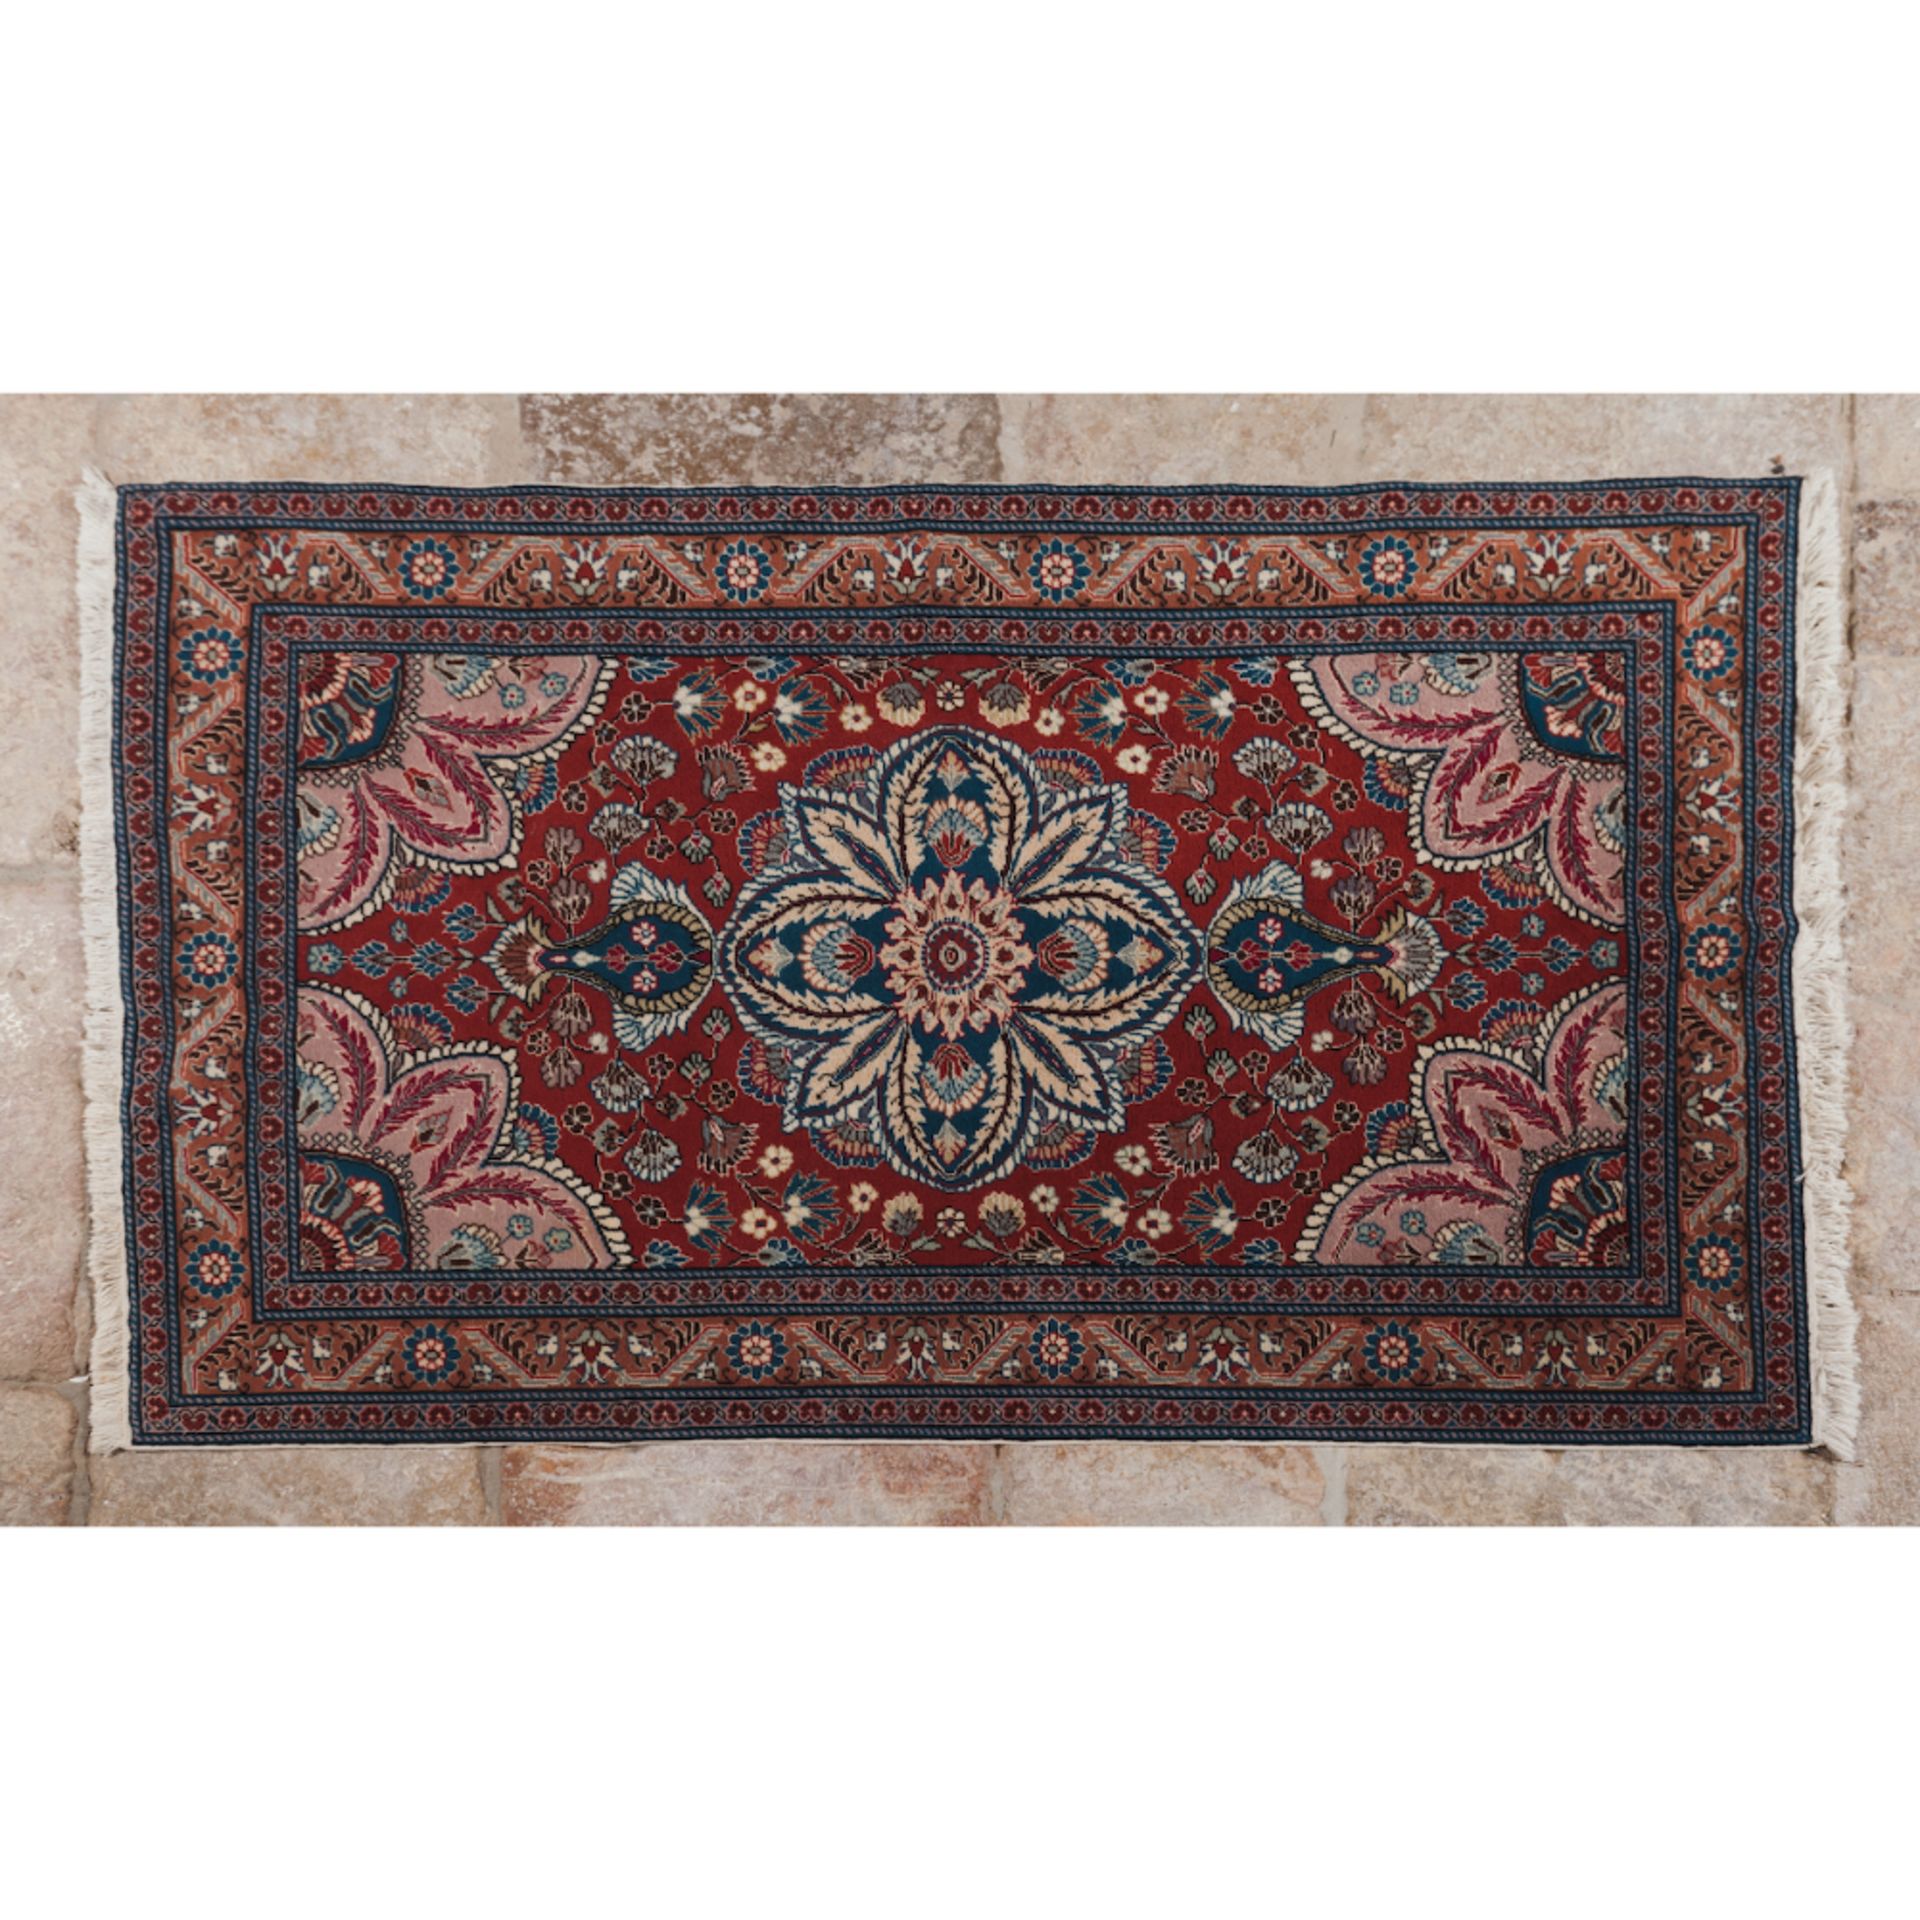 A Kayseri rugWool and cotton Foliage pattern in burgundy, blue, beige and green shades223x146cm